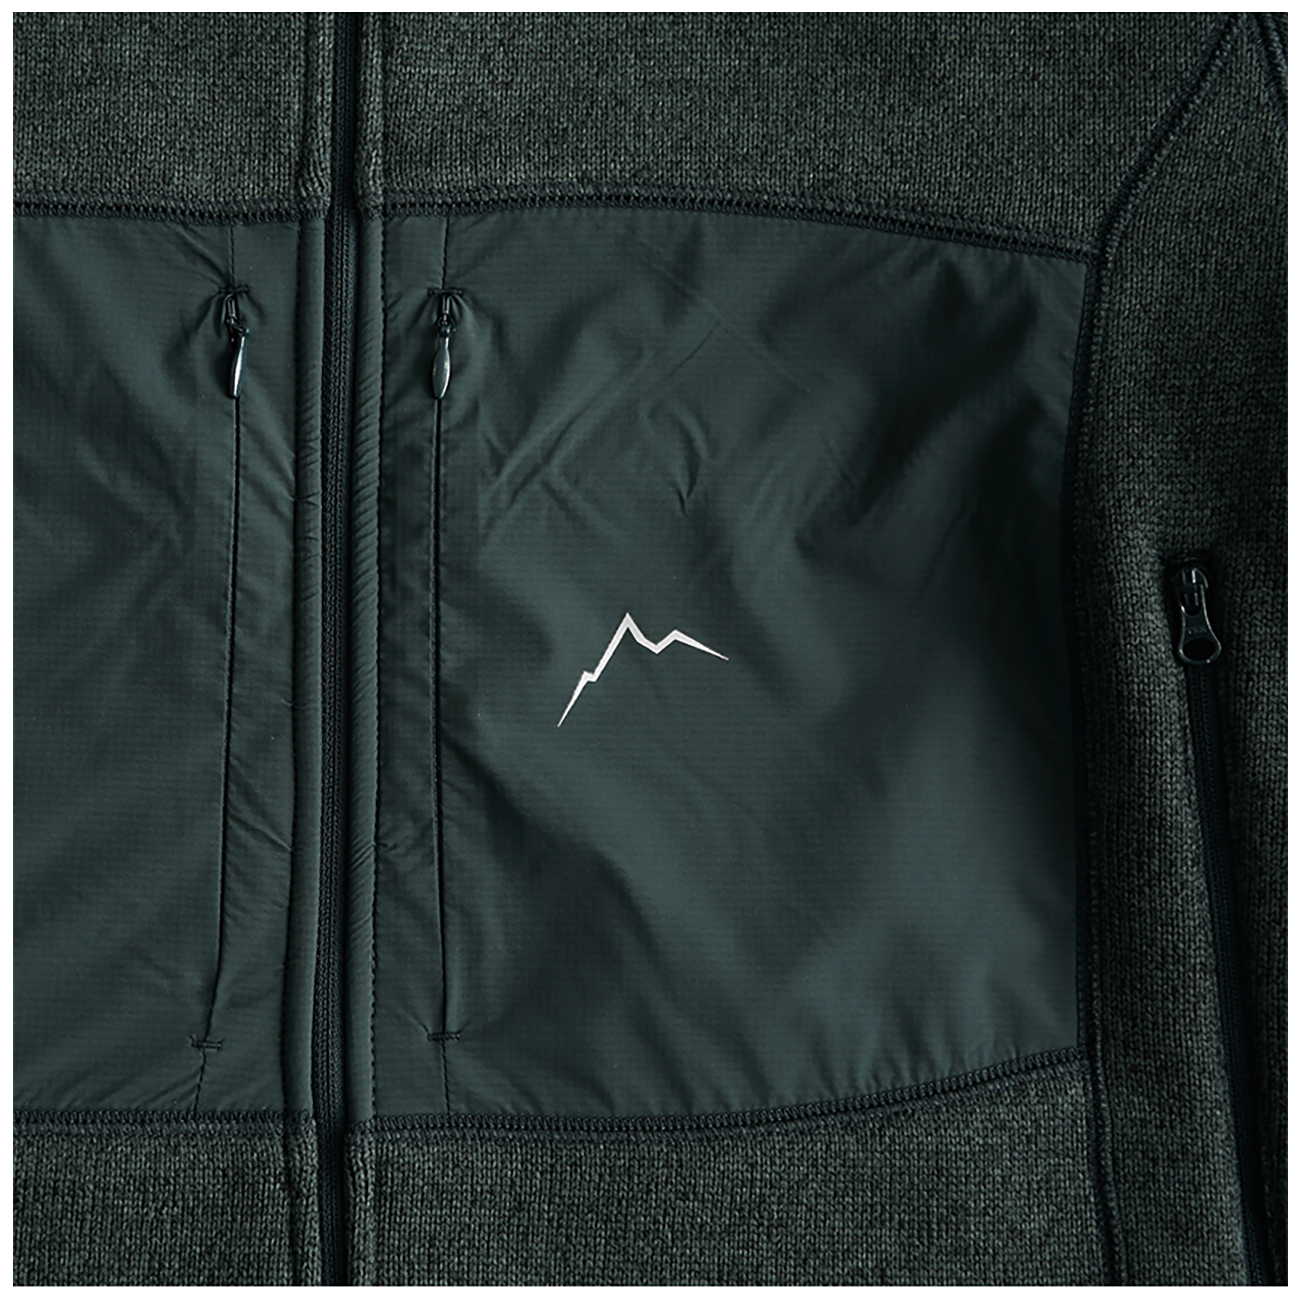 CAYL Thermal Jacket - Forrest Green